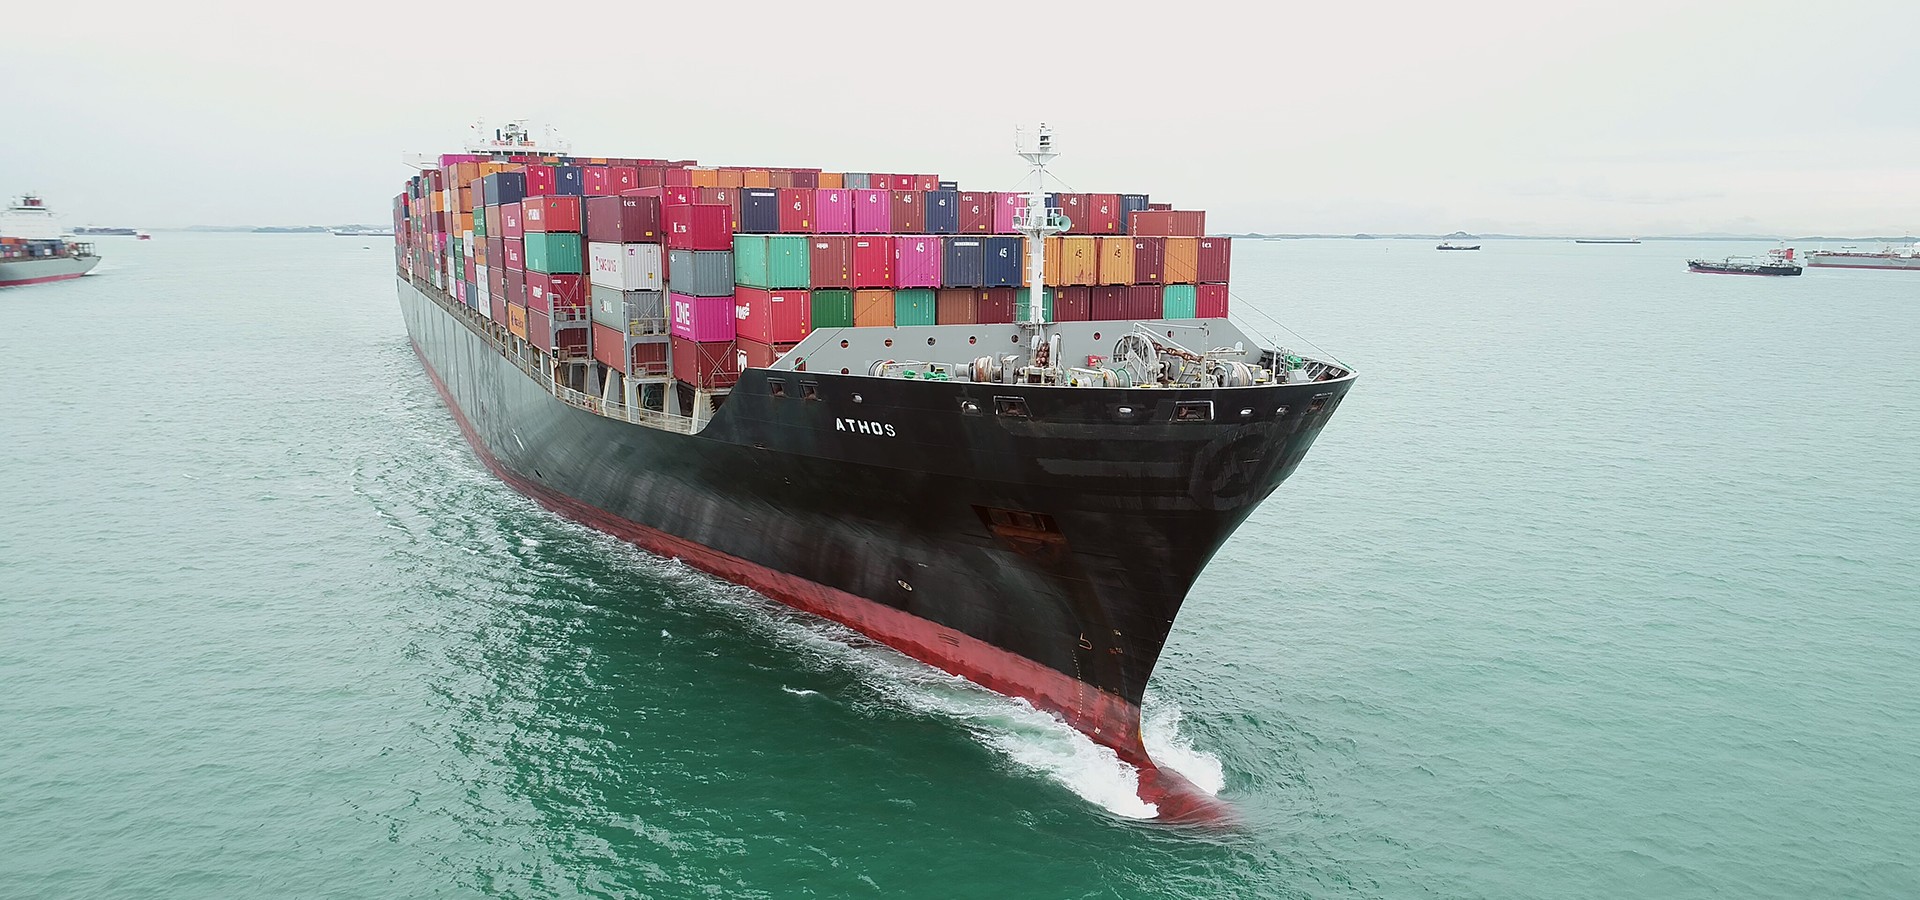 Capital Maritime and Trading – Νέα παραγγελία για τρία υπερσύγχρονα containerships